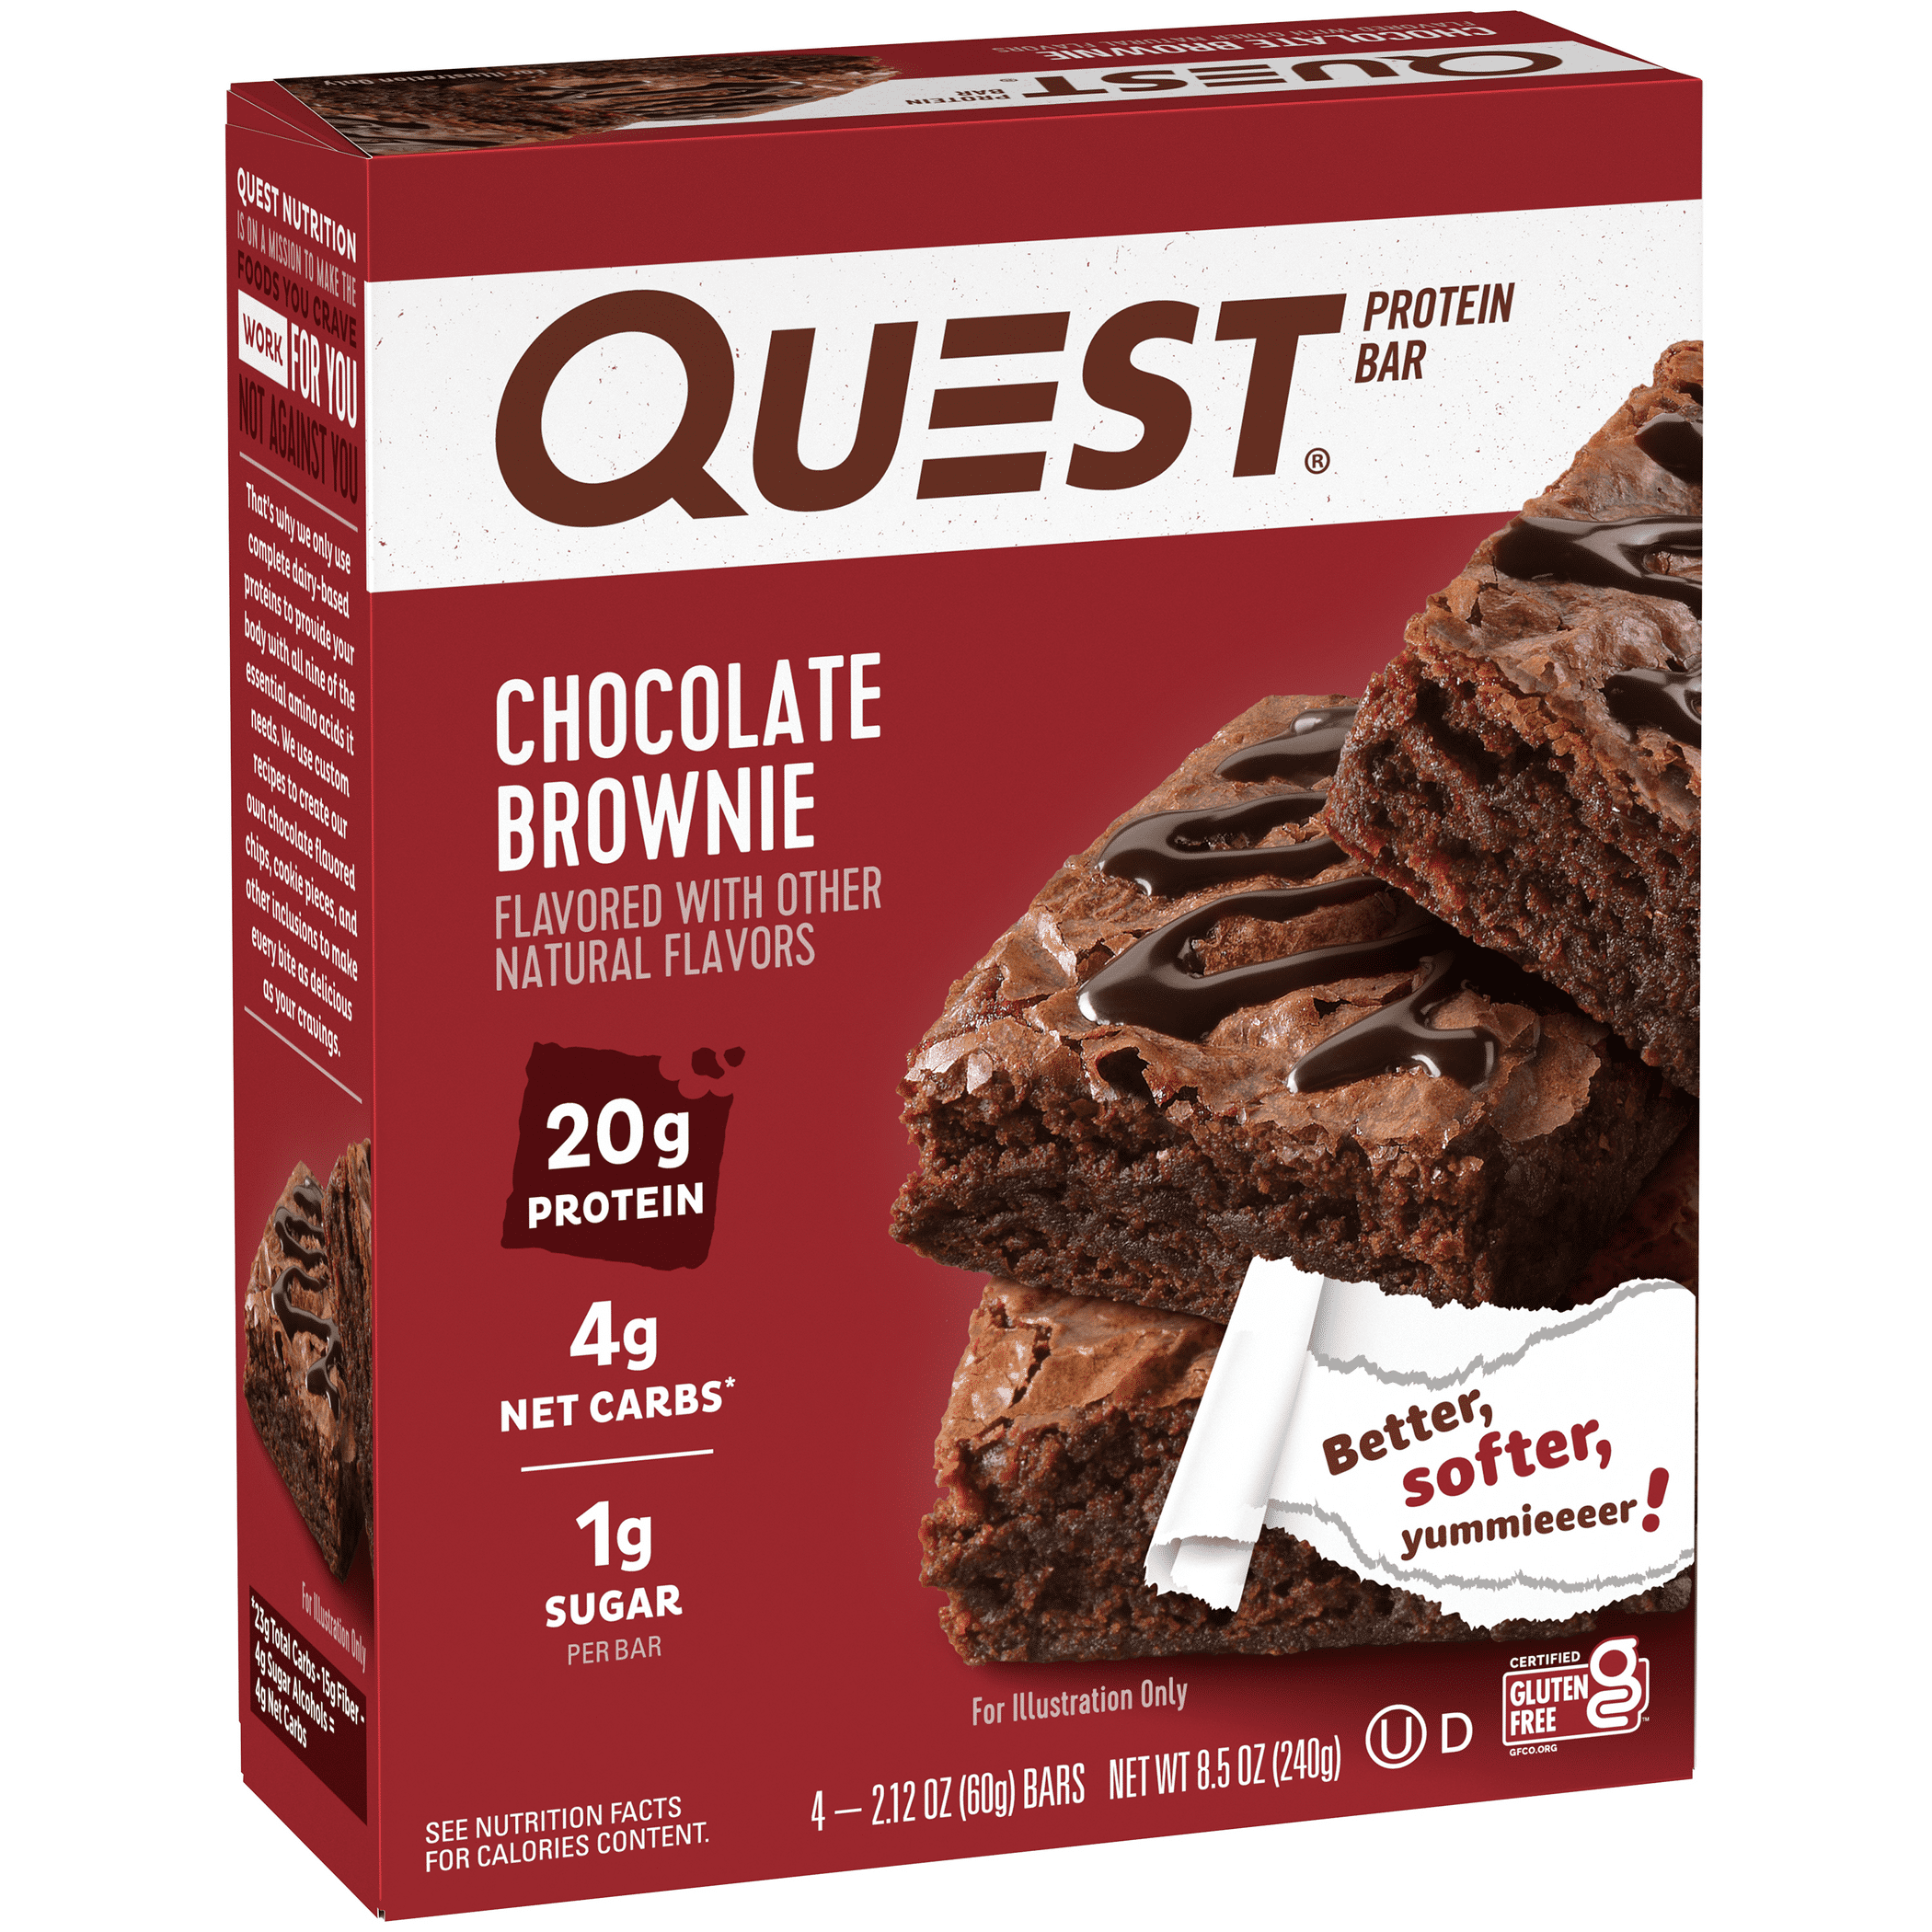 Quest Protein Bar Chocolate Brownie (12 Bars) By Quest, 52% OFF